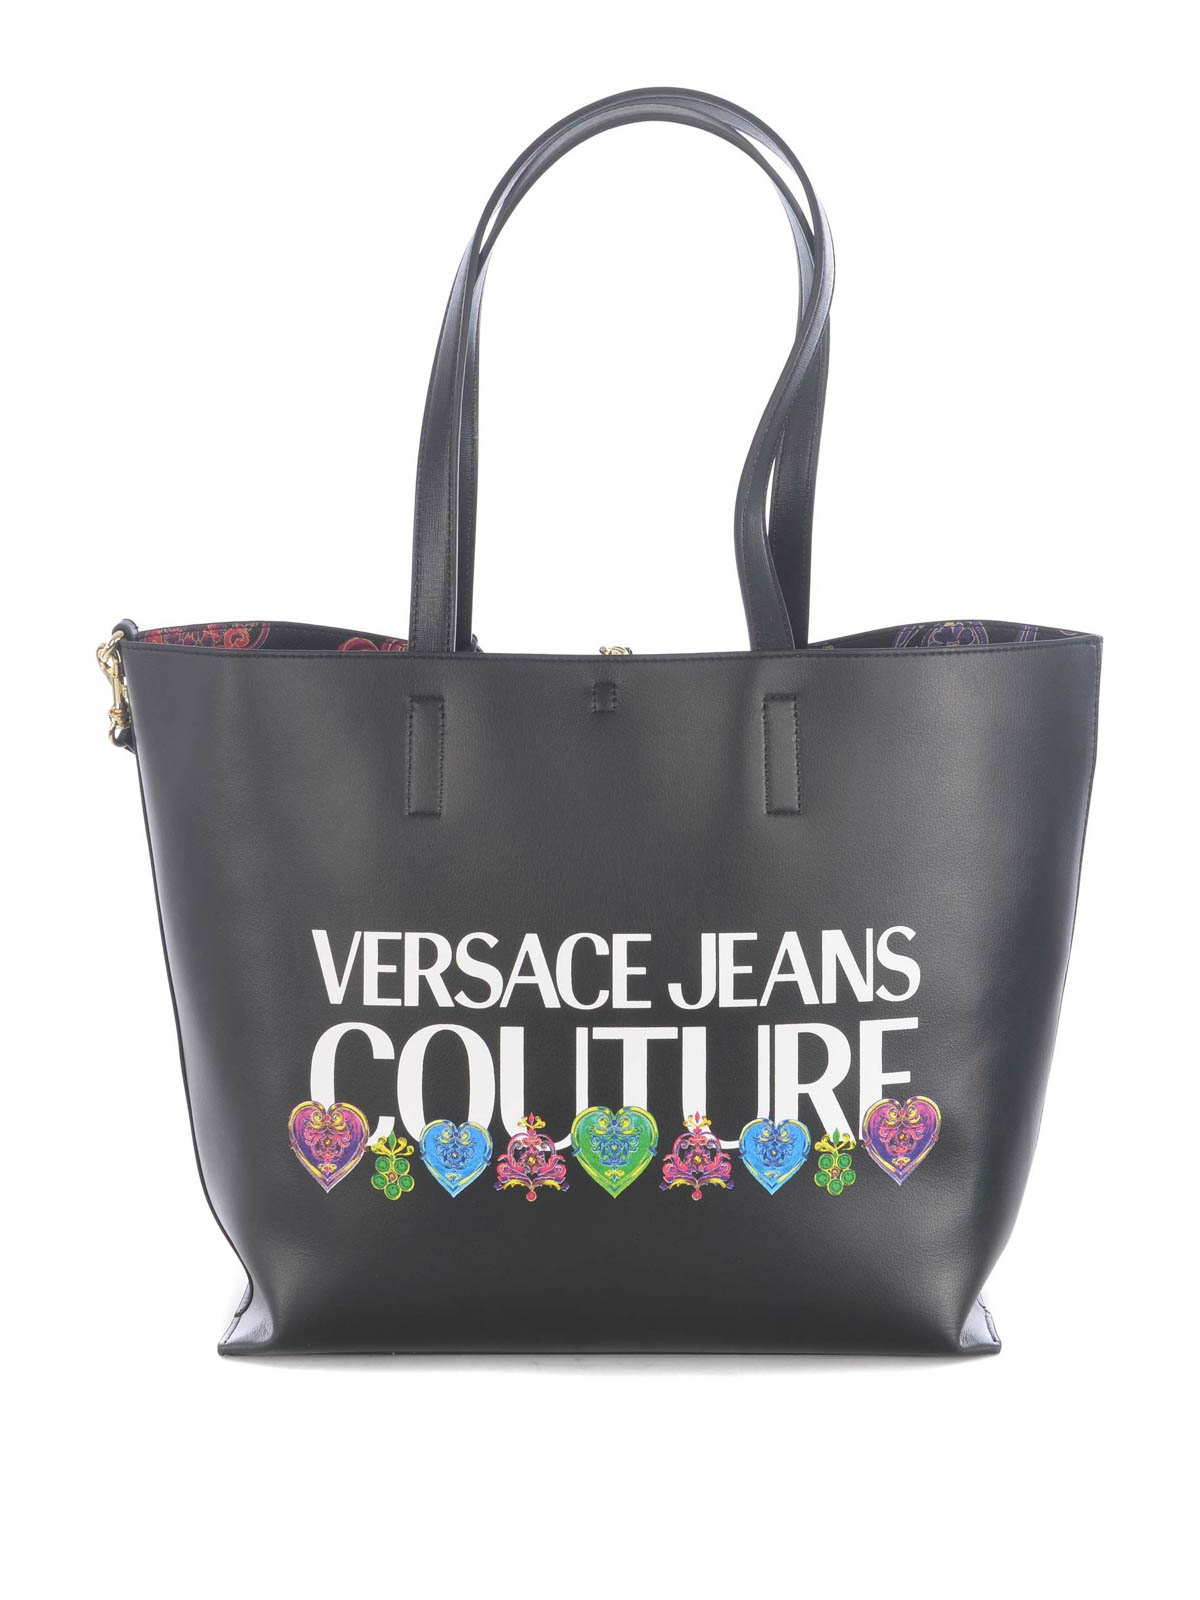 VERSACE JEANS COUTURE トートバッグ ブラック www.krzysztofbialy.com